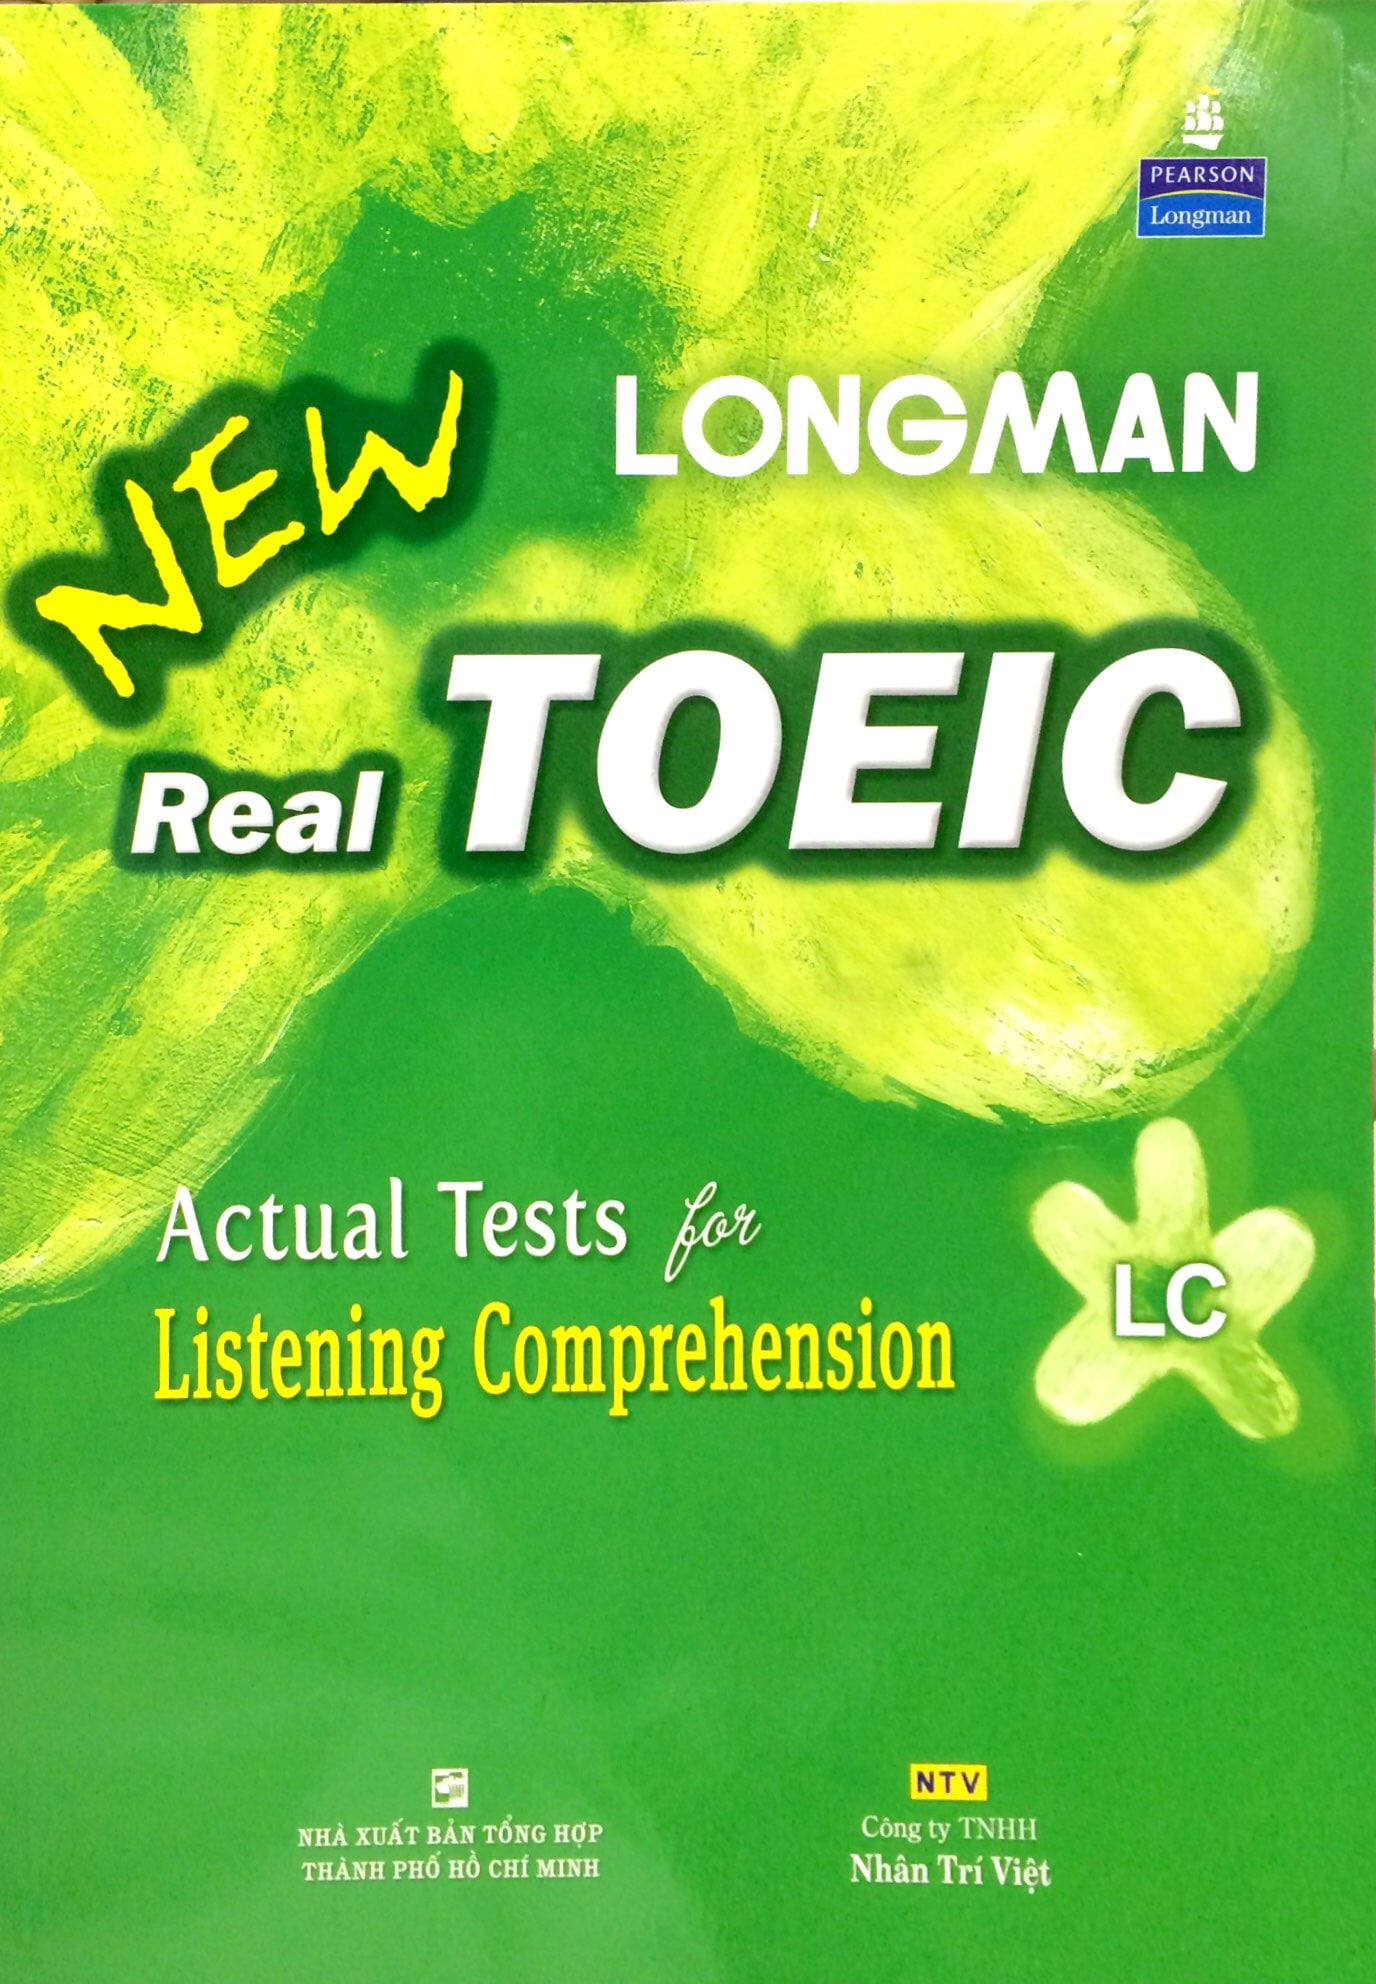 New Longman New Real Toeic - Actual Tests For Listening Comprehension LC CD PDF